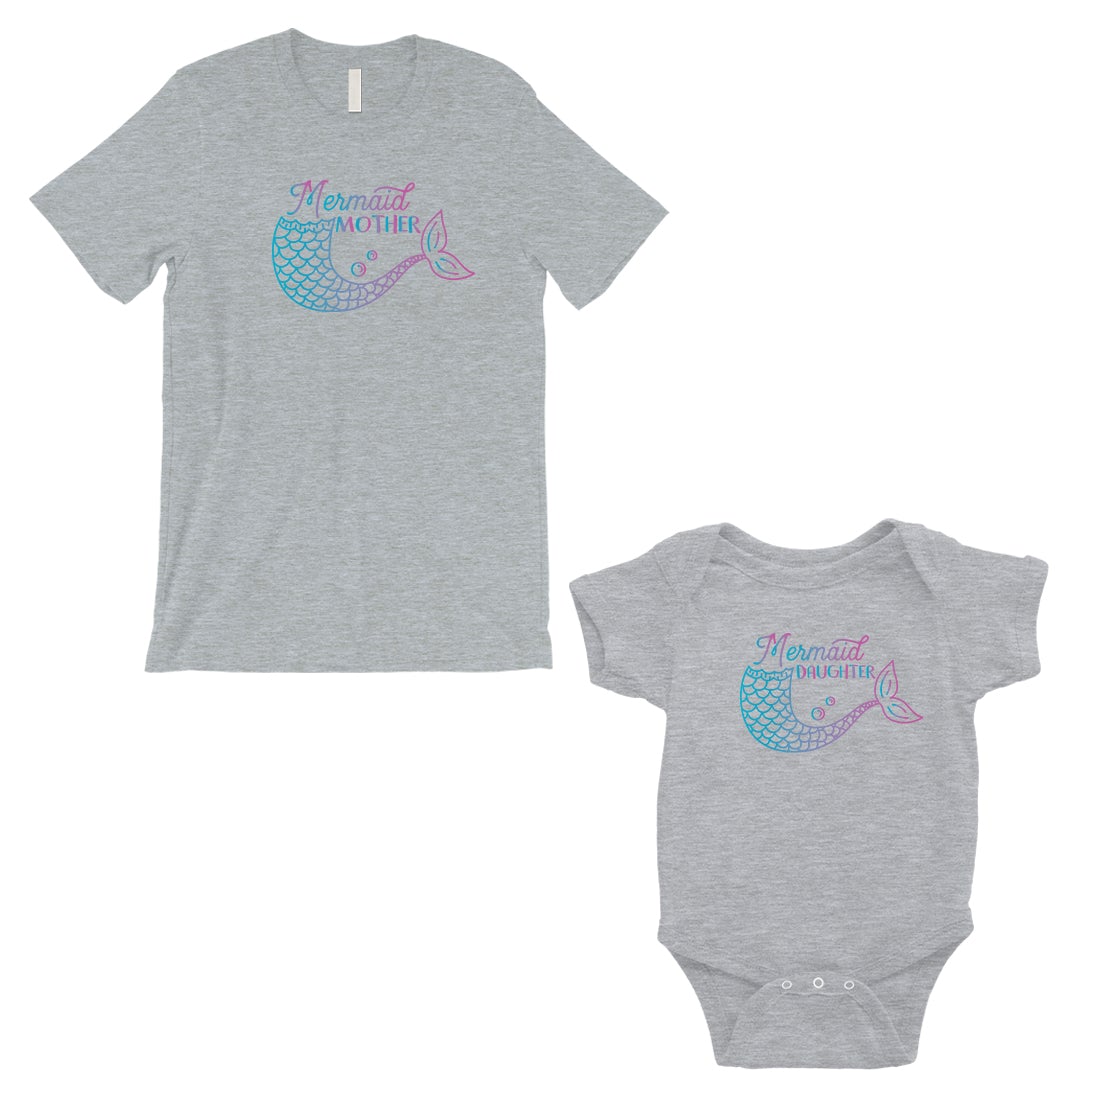 Mermaid Mother Daughter Matching Shirts Grey First Mothers Day Gift